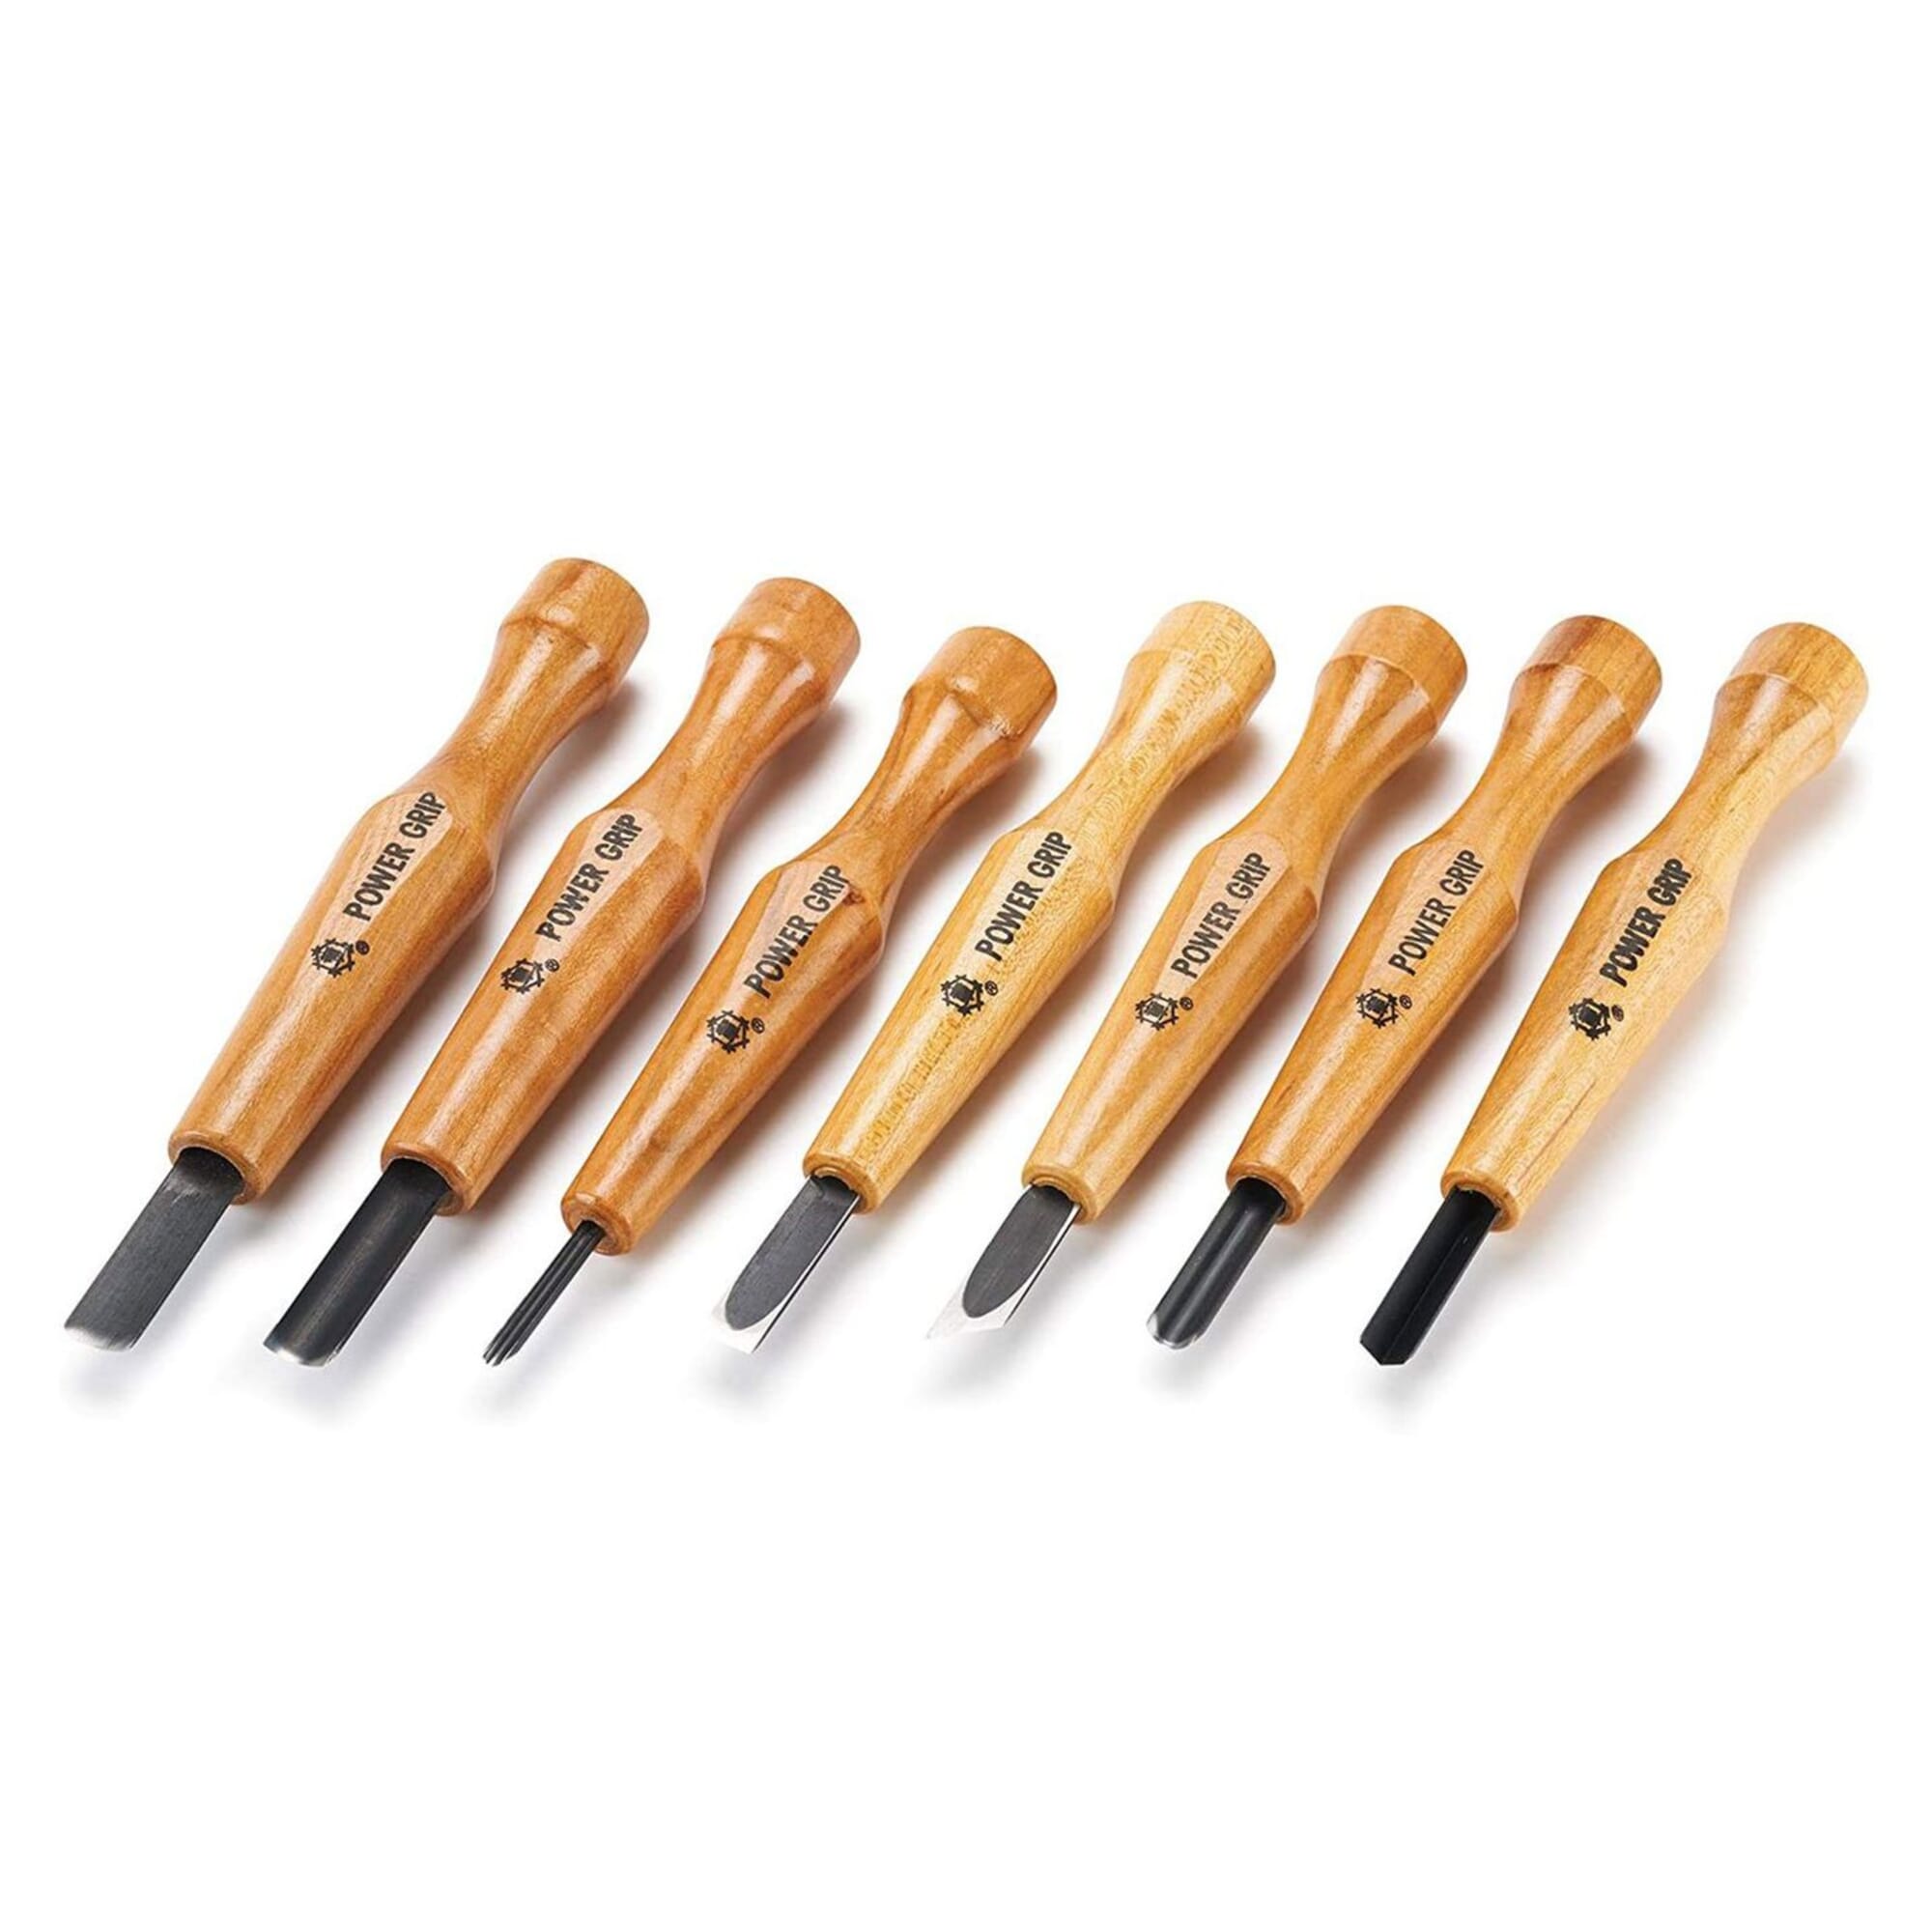 Mikisyo Power Grip Woodcarving 7-Piece Set Left Handed Gouges & Chisels  Wood Carving Tool Kit, with Red Beech Wood Handles, for Woodworking